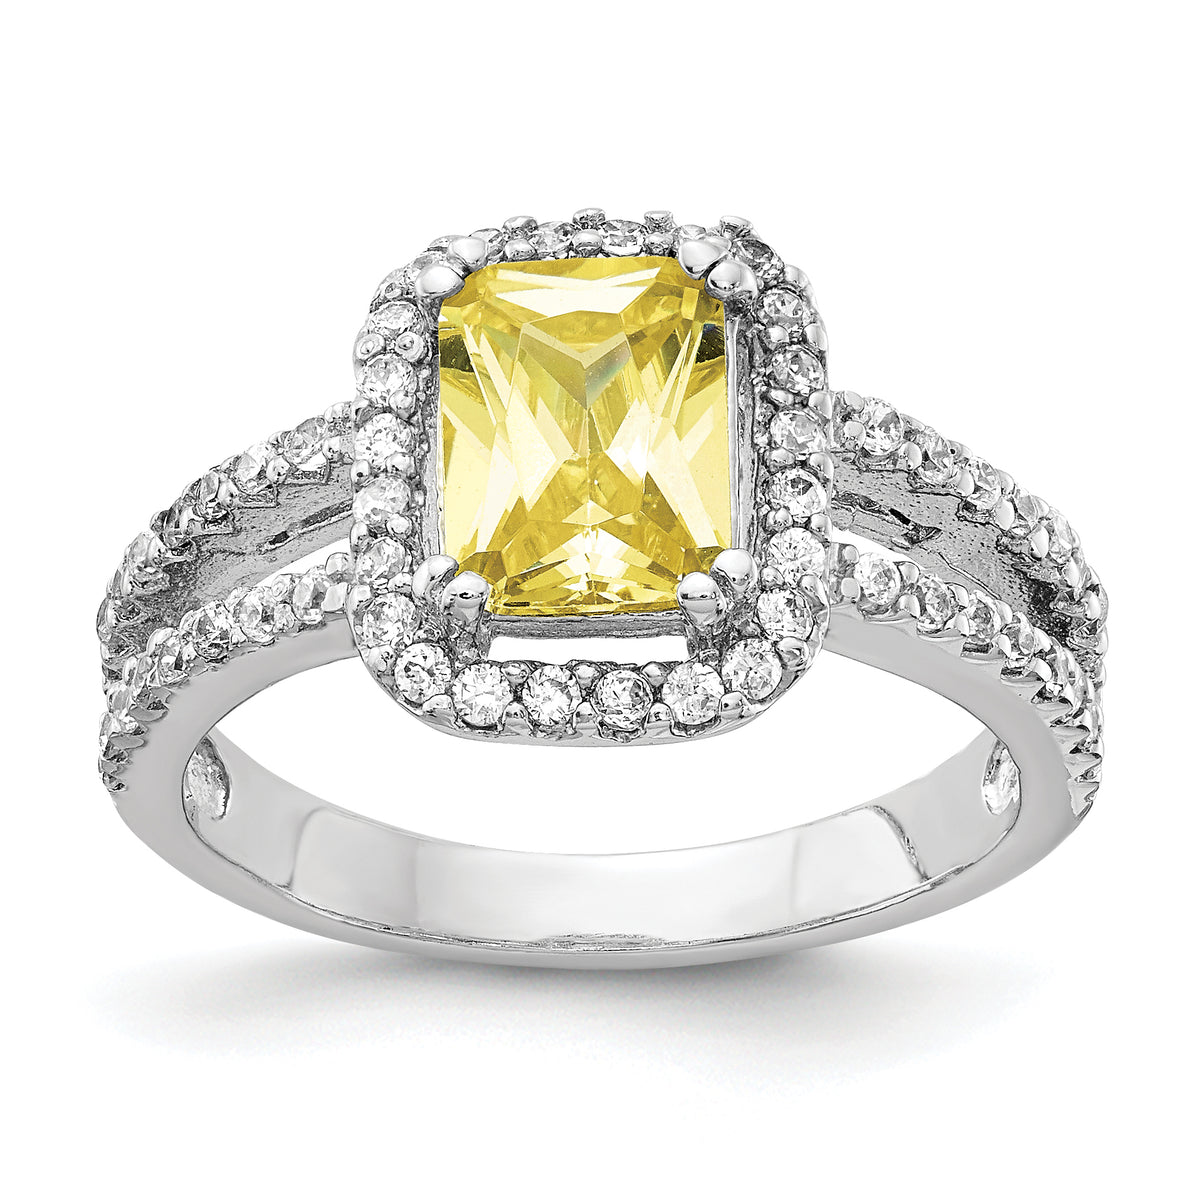 Cheryl M Sterling Silver Rhodium-plated Fancy Yellow Elongated Cushion-cut and White Brilliant-cut CZ Halo Ring